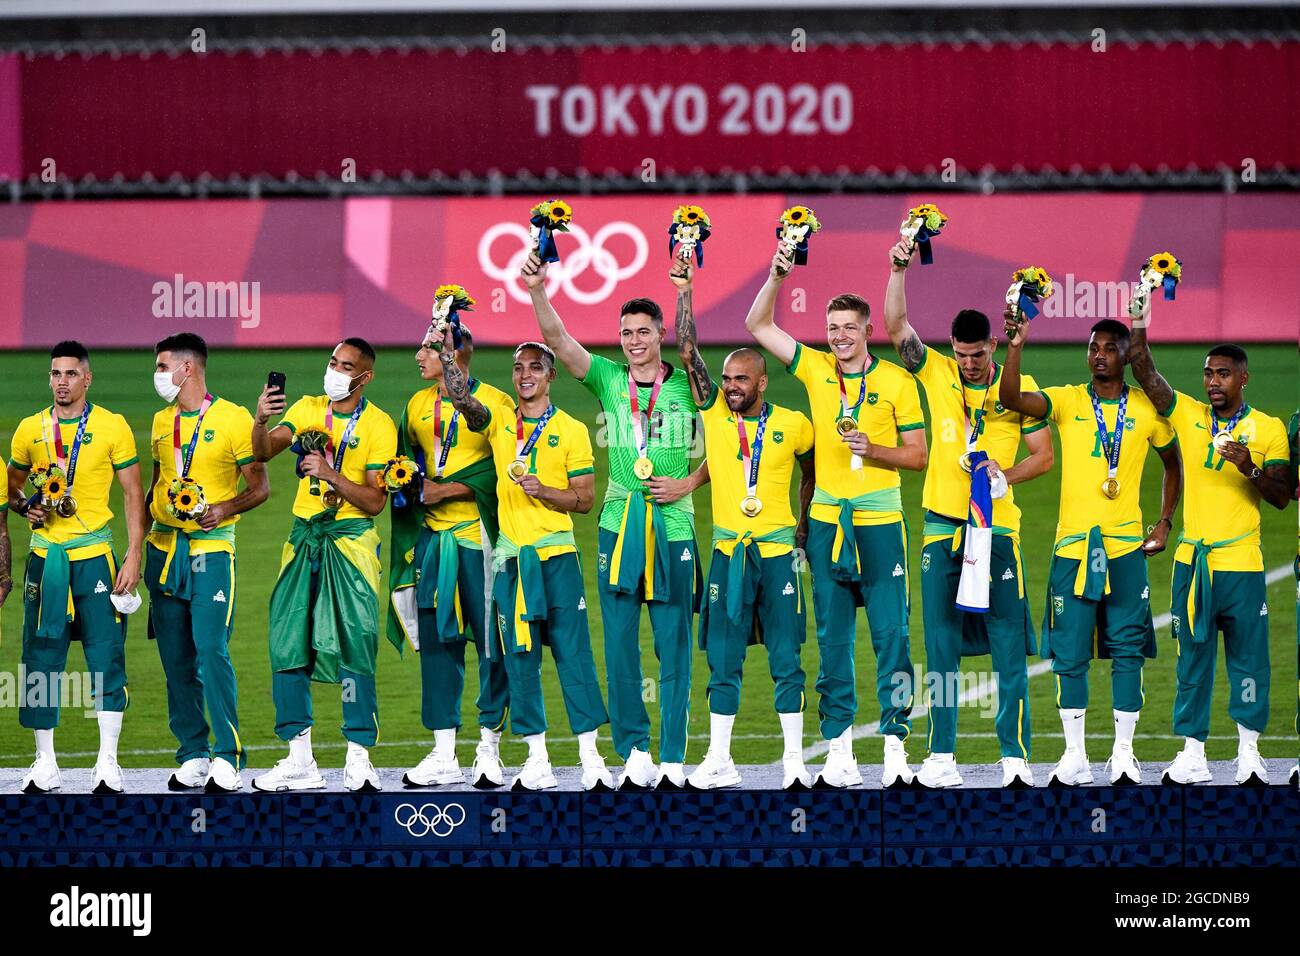 YOKOHAMA, JAPAN - AUGUST 7: Paulinho of Brazil, Bruno Guimaraes of Brazil, Matheus Cunha of Brazil, Richarlison of Brazil, Antony of Brazil, Brenno Costa of Brazil, Dani Alves of Brazil, Bruno Fuchs of Brazil, Nino of Brazil, Abner Vinicius of Brazil and Malcom of Brazil showing their gold medal after the Tokyo 2020 Olympic Mens Football Tournament Gold Medal Match between Brazil and Spain at International Stadium Yokohama on August 7, 2021 in Yokohama, Japan (Photo by Pablo Morano/Orange Pictures) Stock Photo